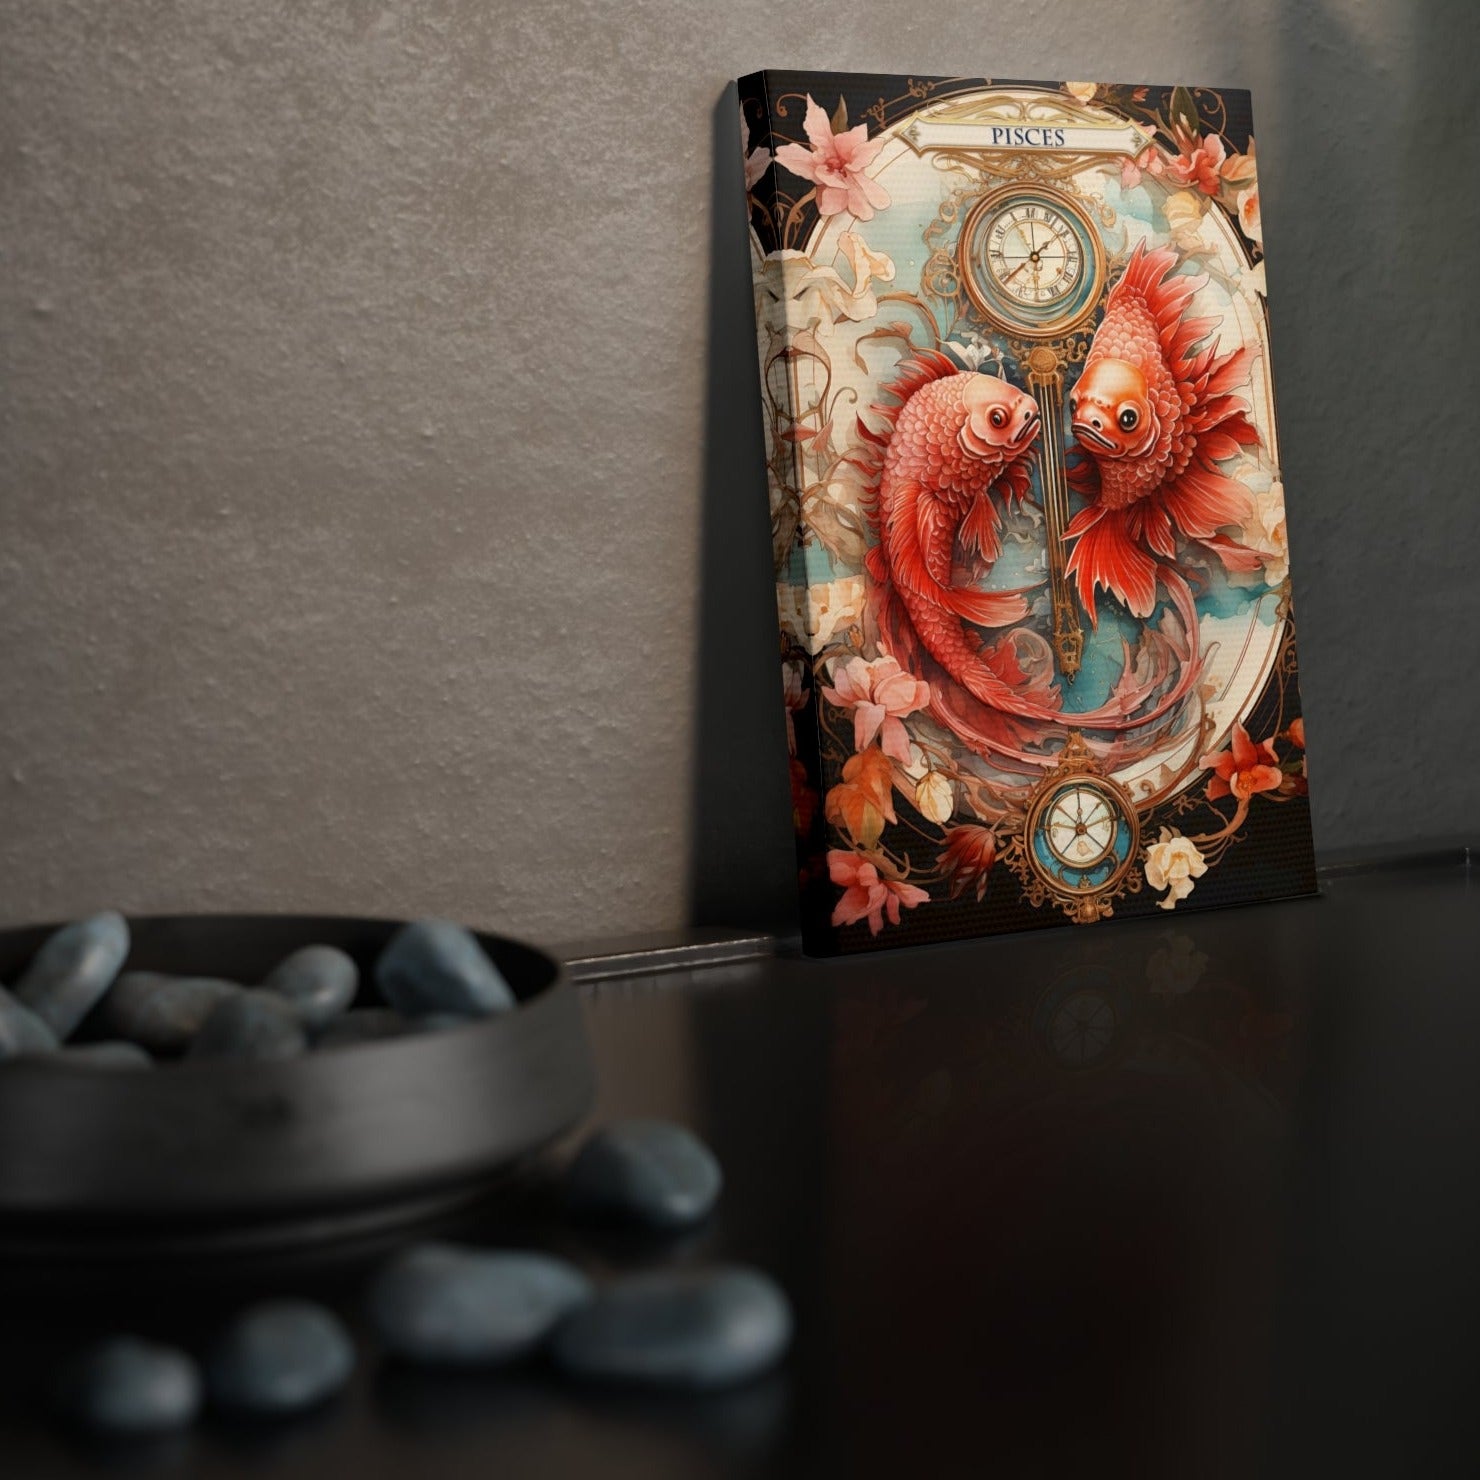 Cotton Canvas wall art print of a Pisces Zodiac image with a floral design element. A modern take of an elegant astrological symbol